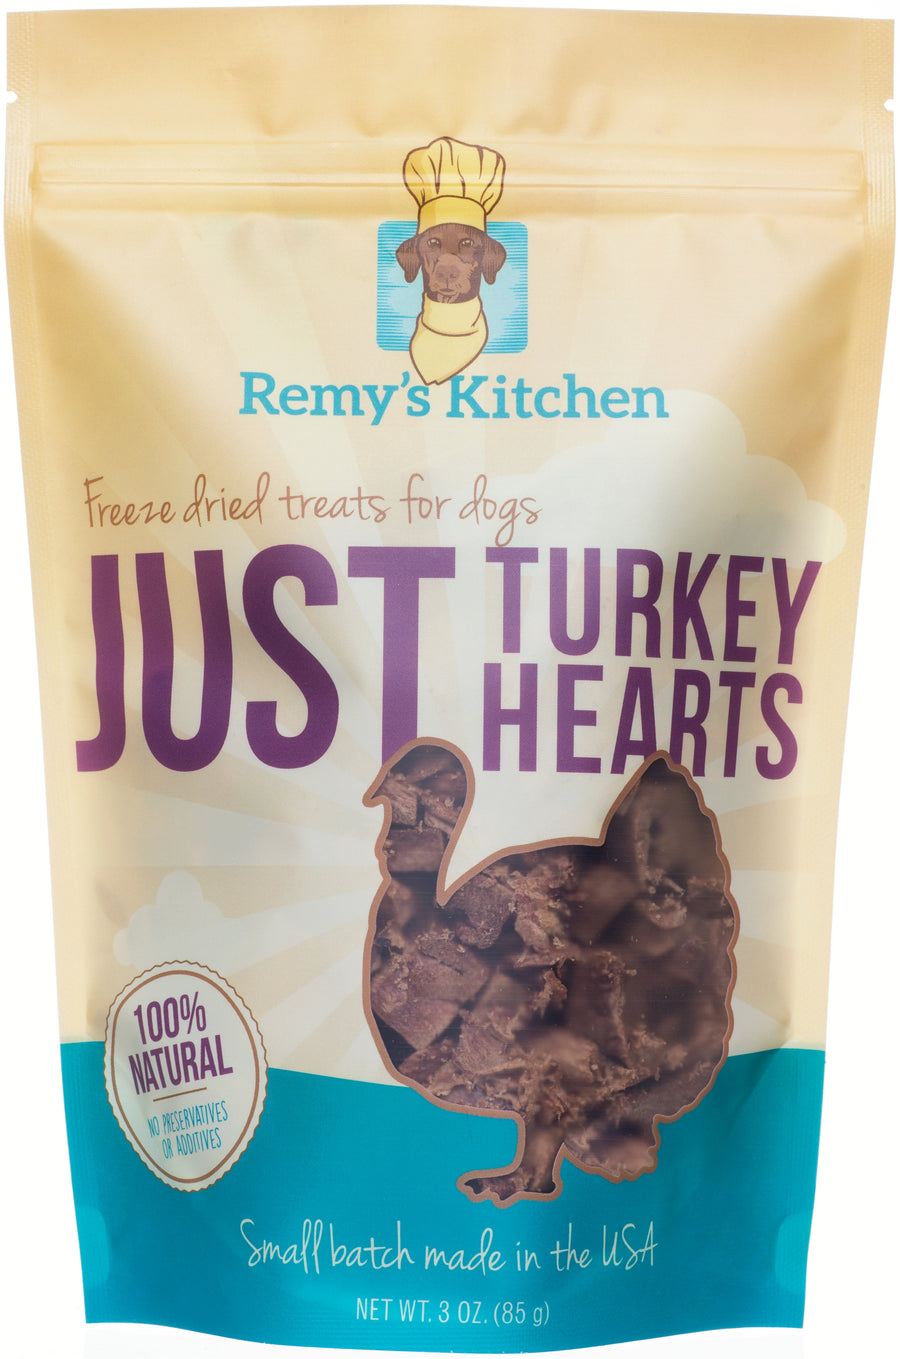 Remys Kitchen Freeze Dried treats for dogs Just turkey hearts